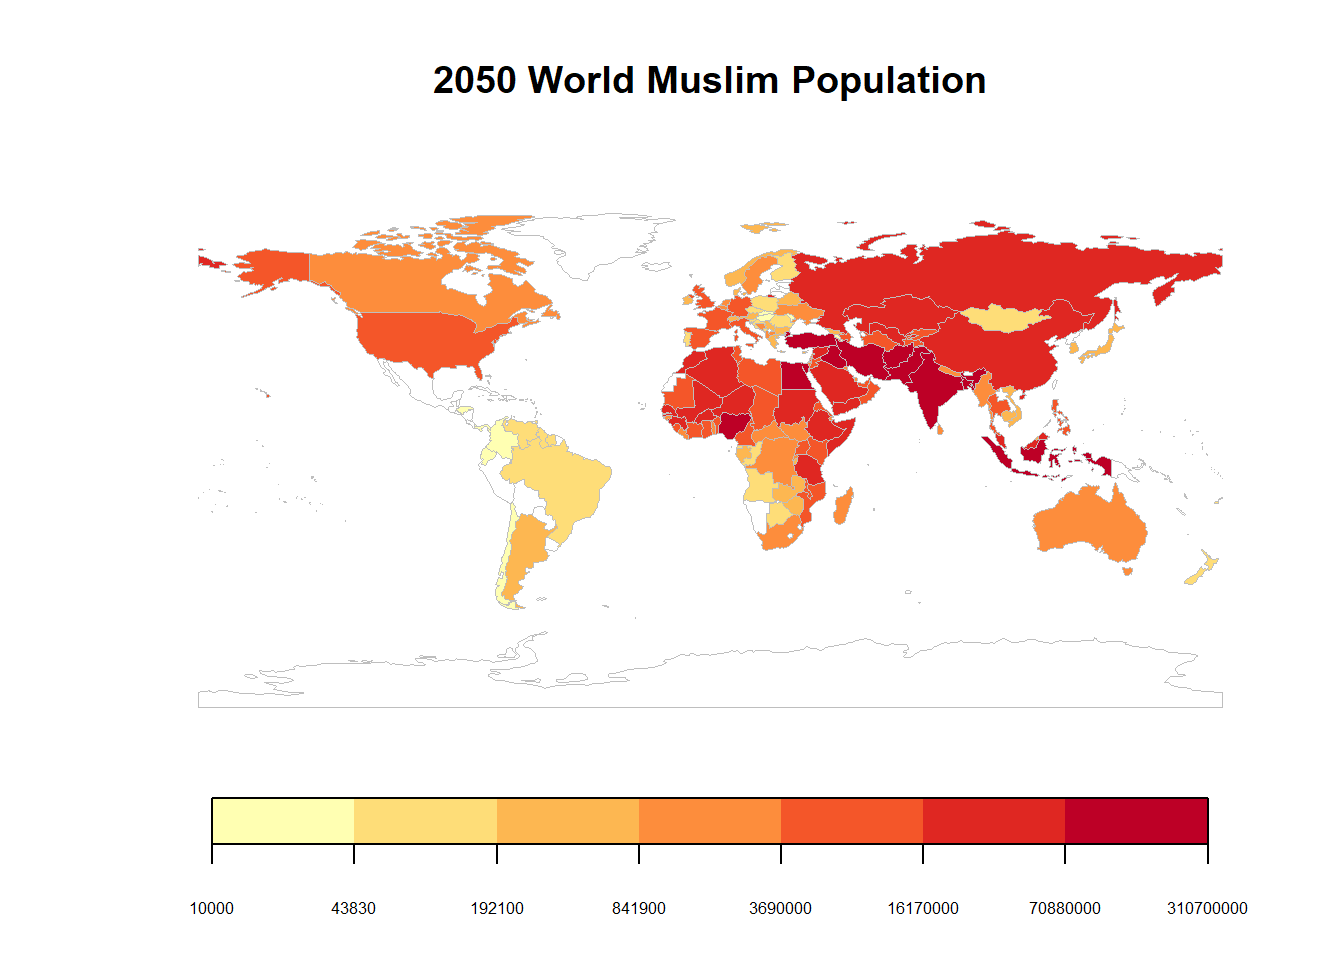 Country Heat Map of Muslim Population in 2050